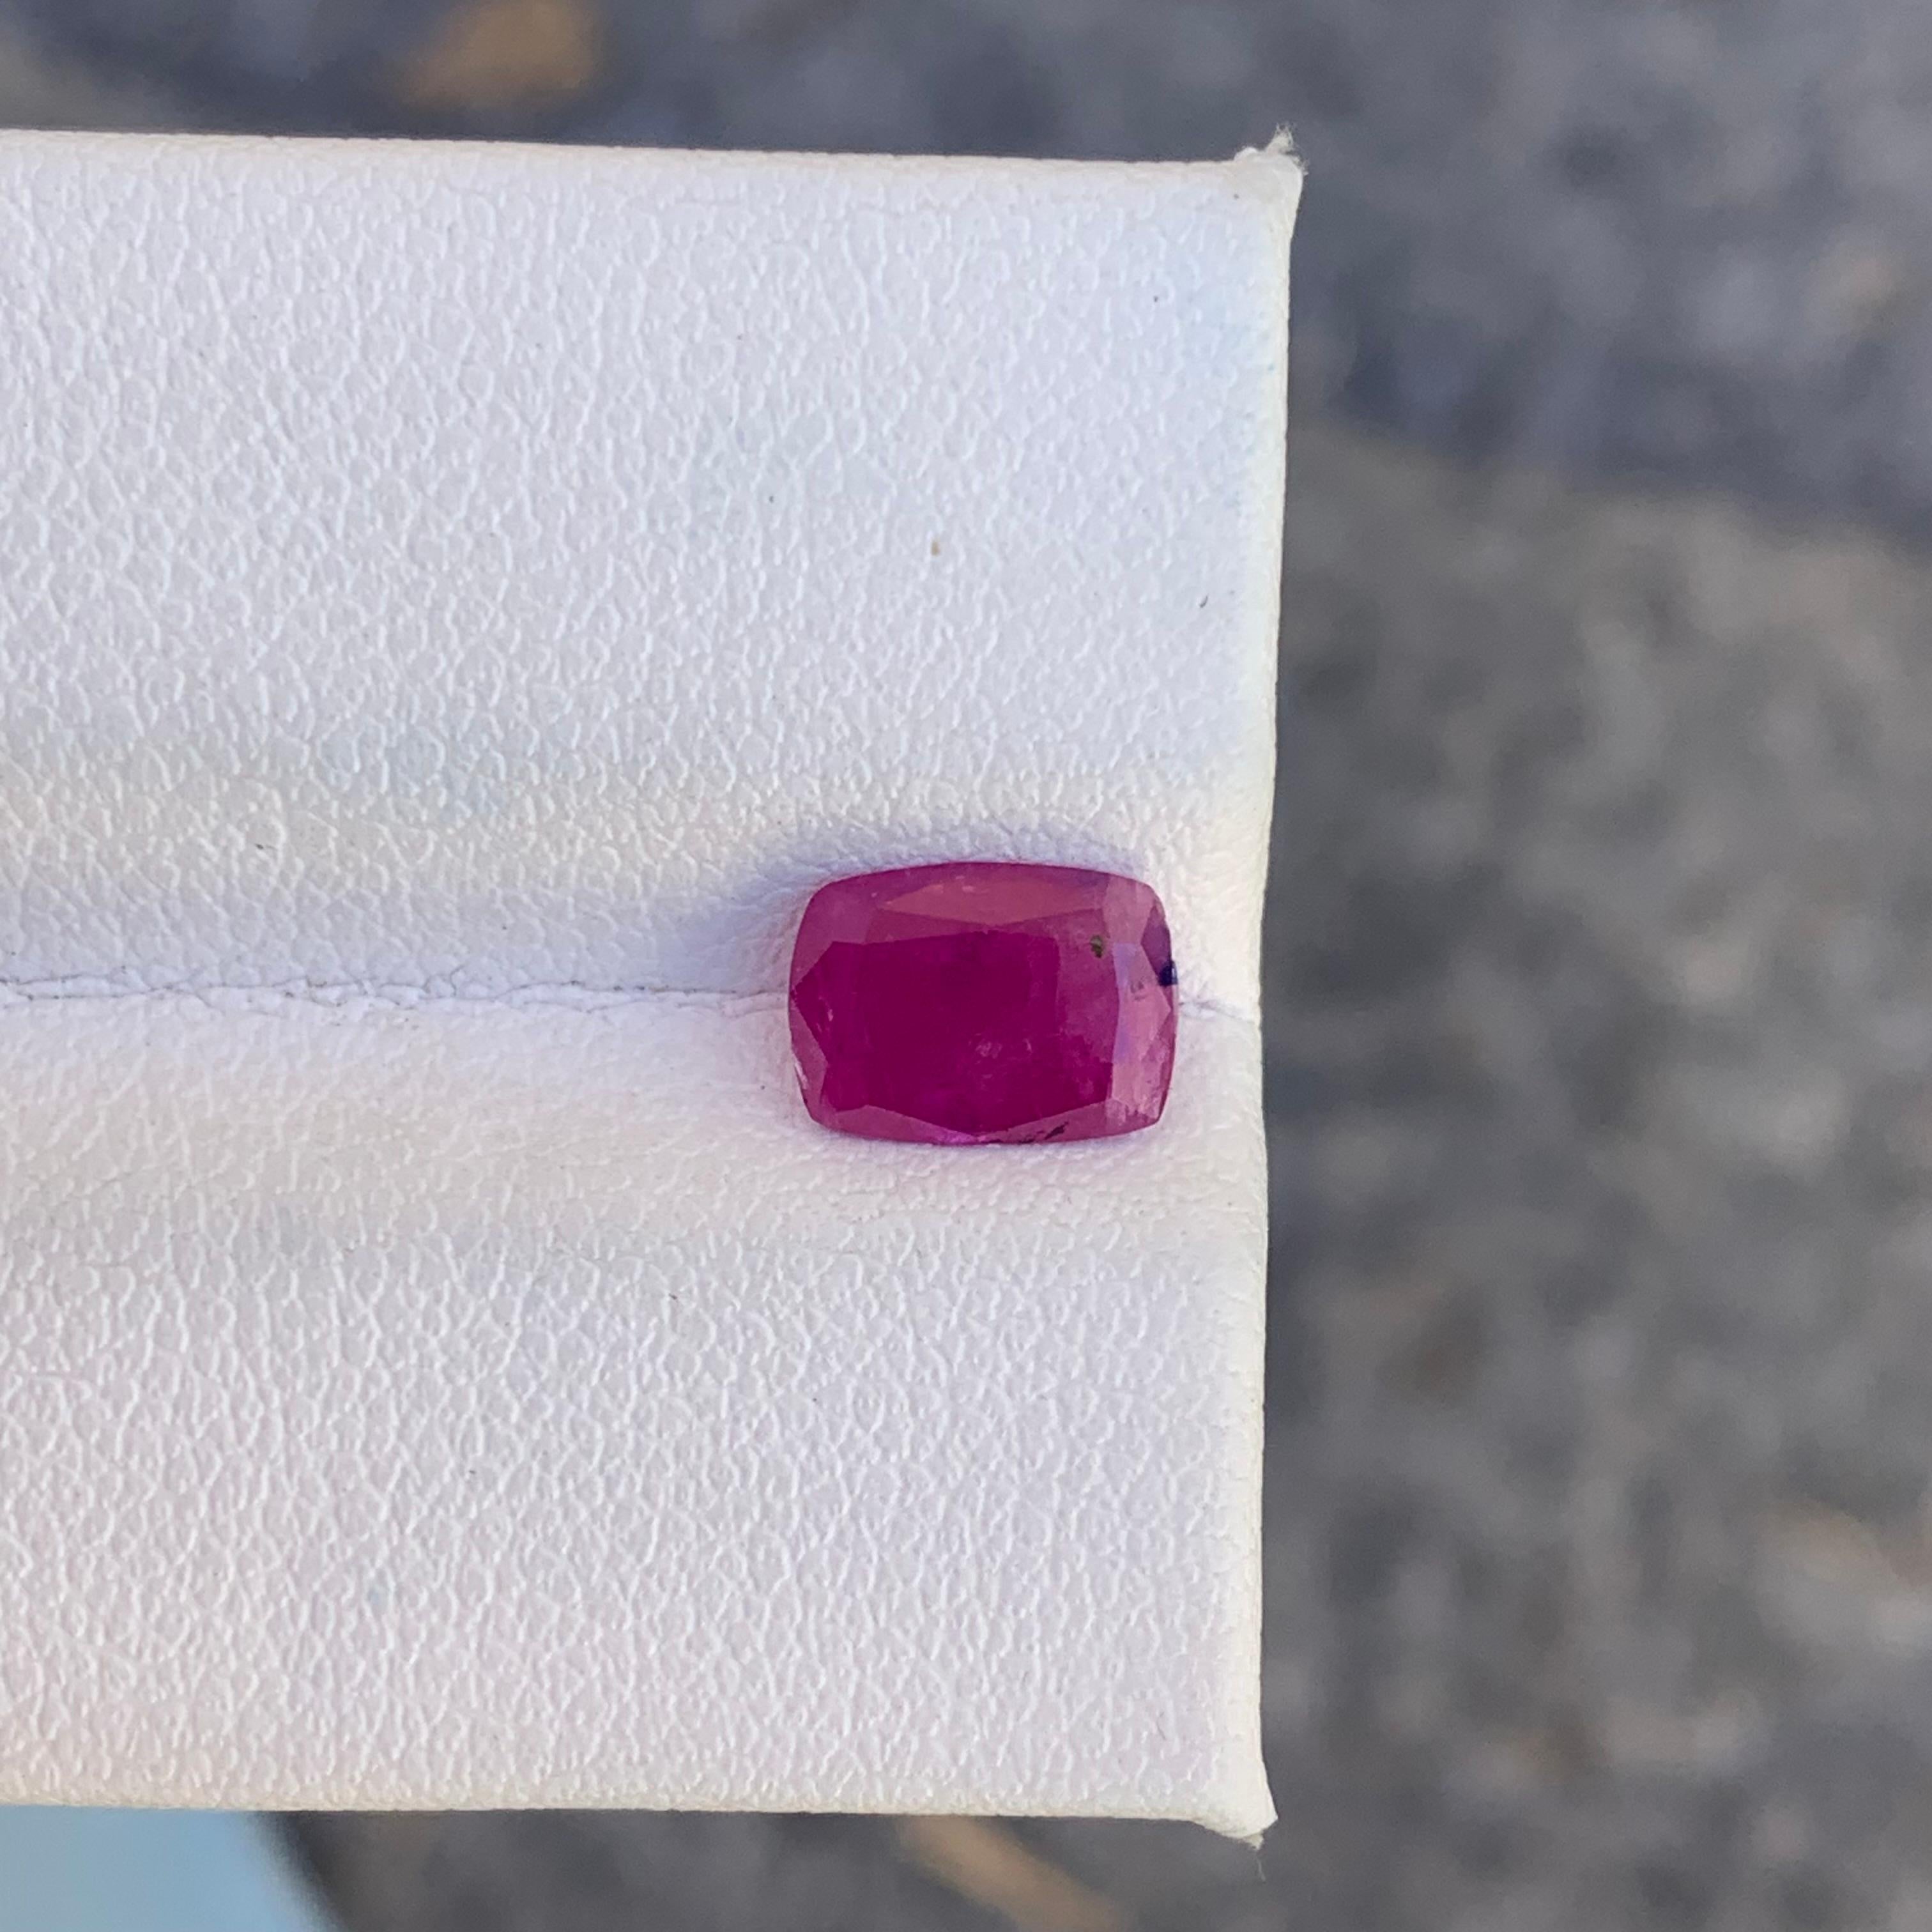 Certified 1.65 Carat Natural Loose Ruby Corundum From Afghan Mine Ring Gemstone For Sale 3